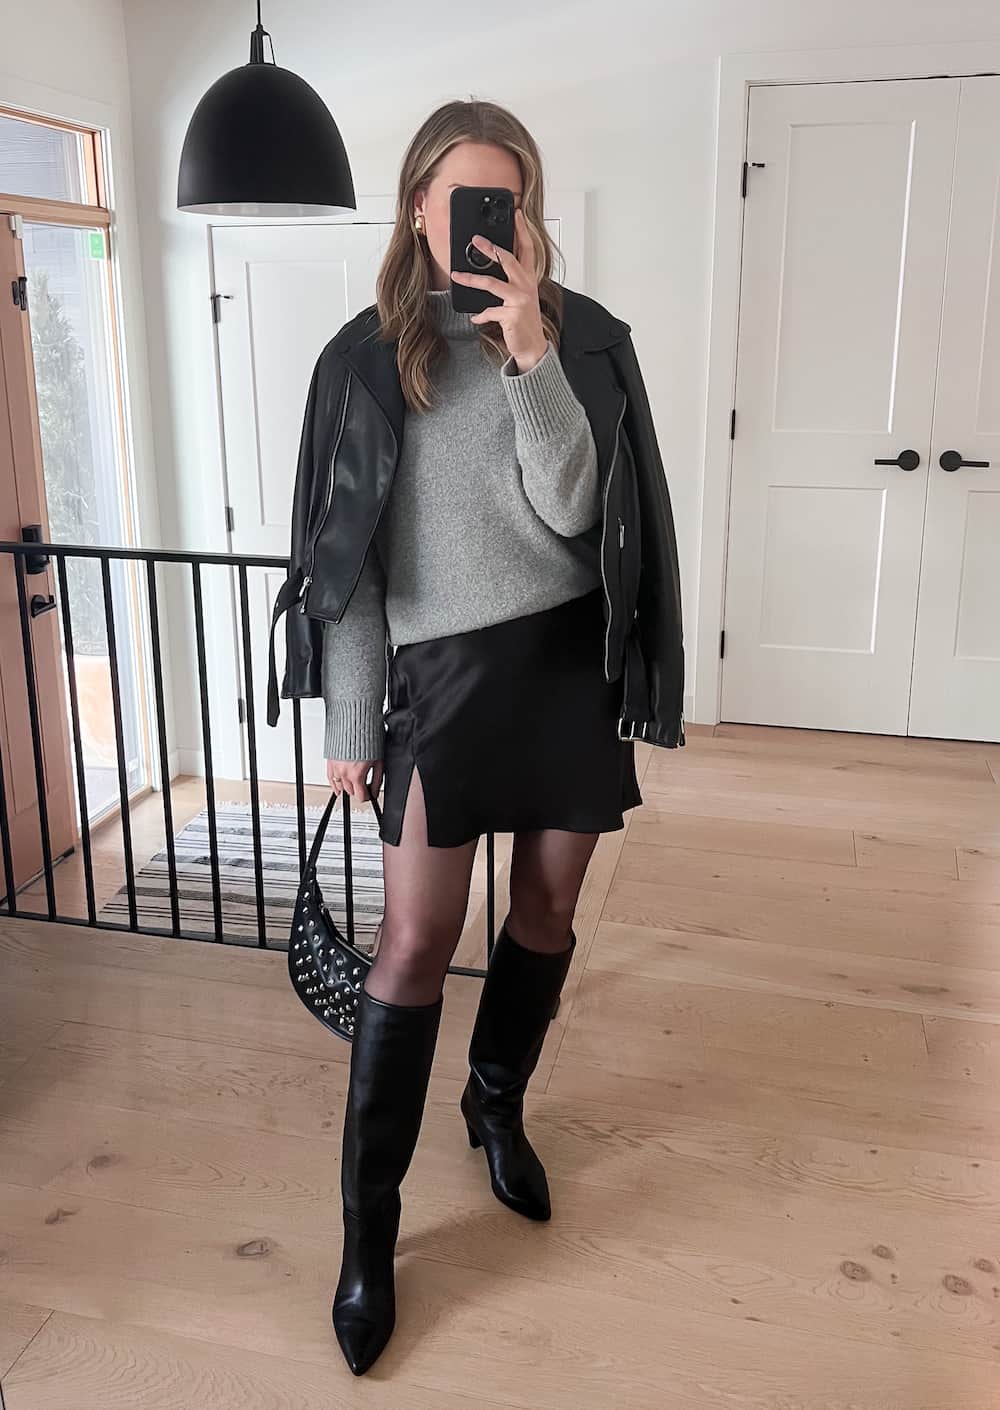 woman wearing a winter going out outfit with a black leather jacket over a grey knit turtleneck, black mini skirt, tights, and black knee-high boots